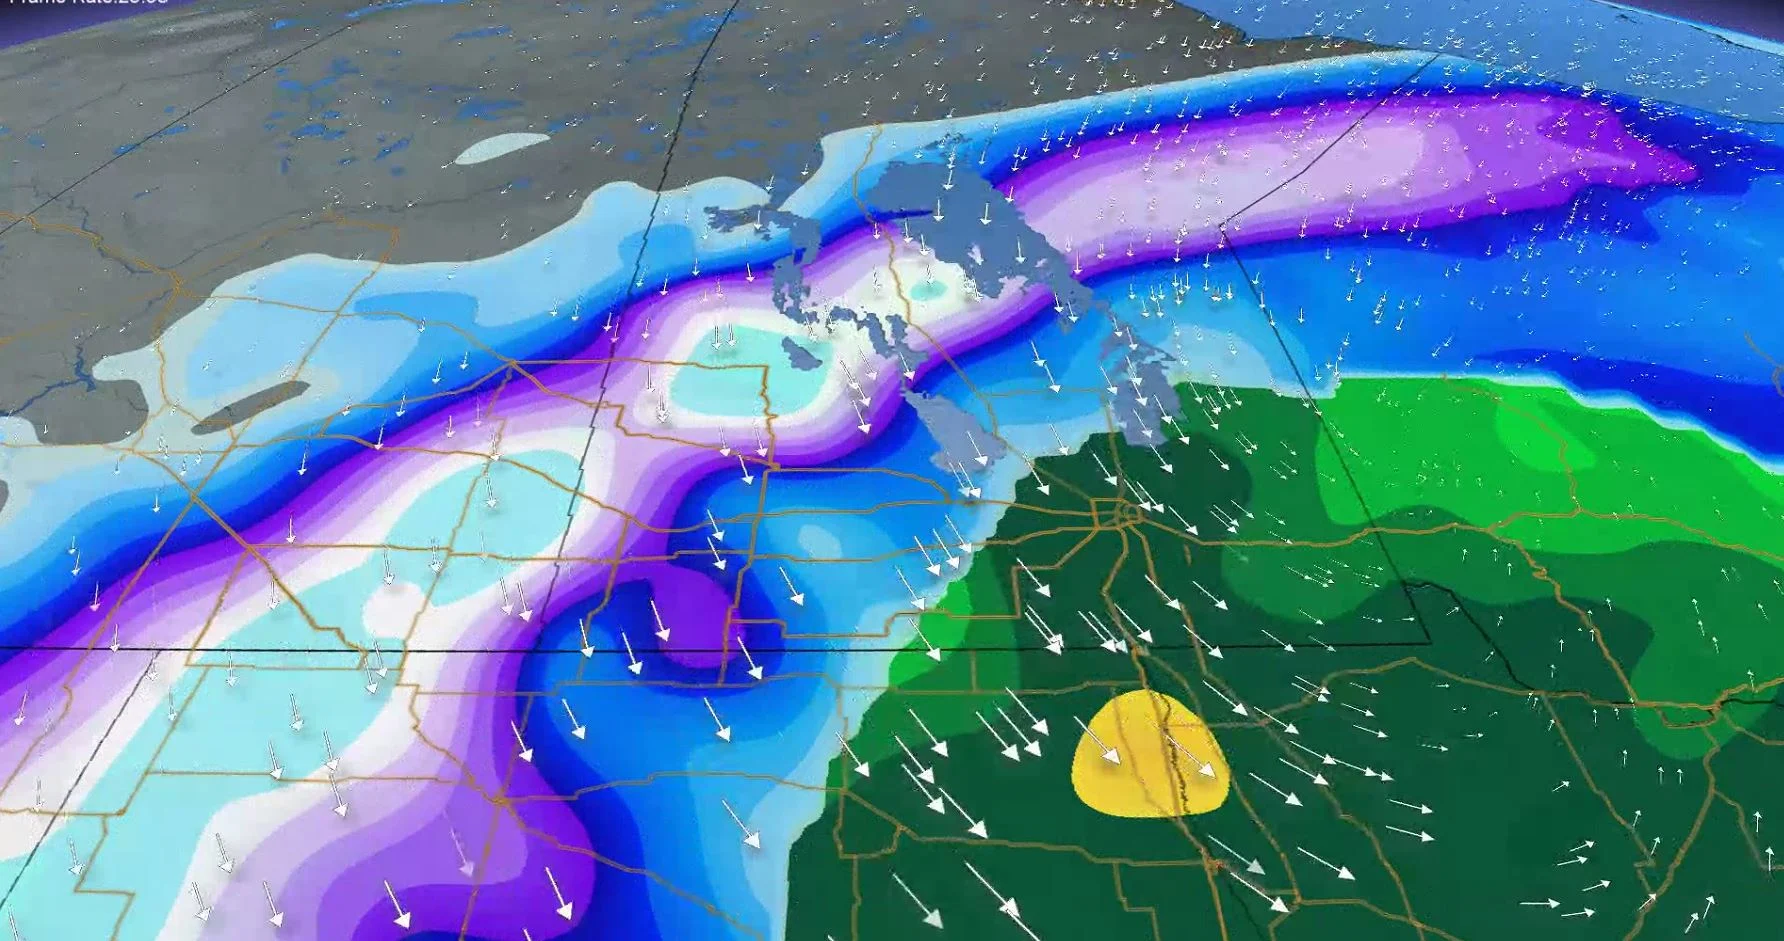 Disruptions likely as another major winter storm eyes the Prairies